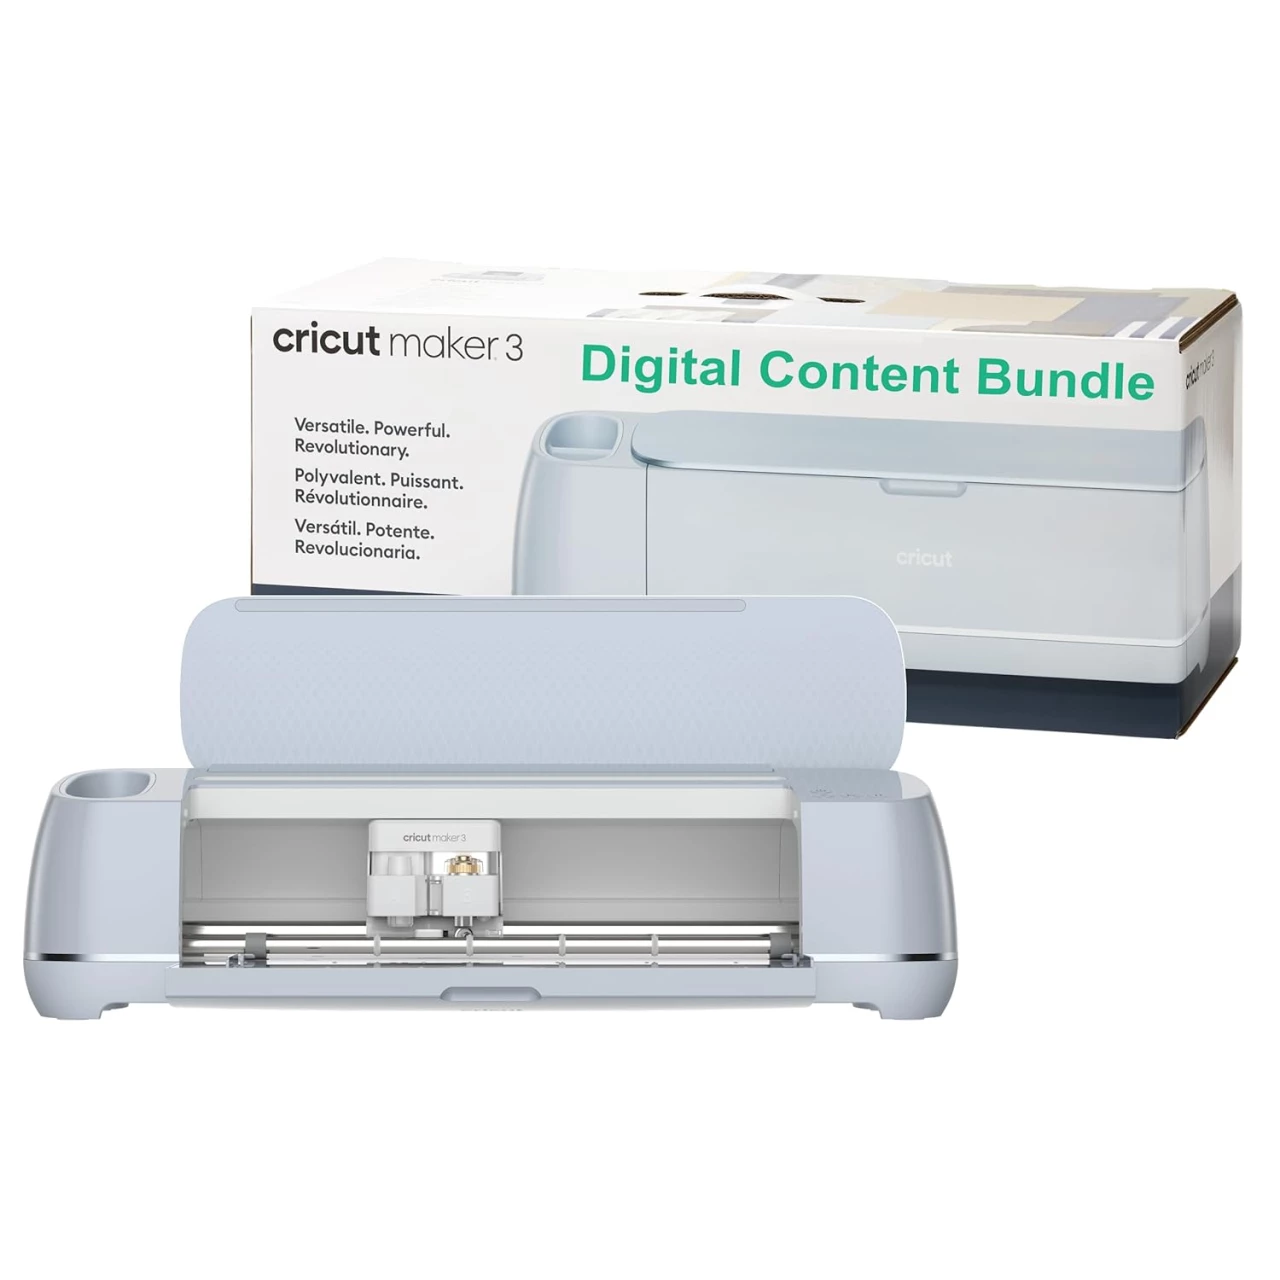 Cricut Maker 3 &amp; Digital Content Library Bundle - Includes 30 images in Design Space App - Smart Cutting Machine, 2X Faster &amp; 10X Cutting Force, Cuts 300+ Materials, Blue